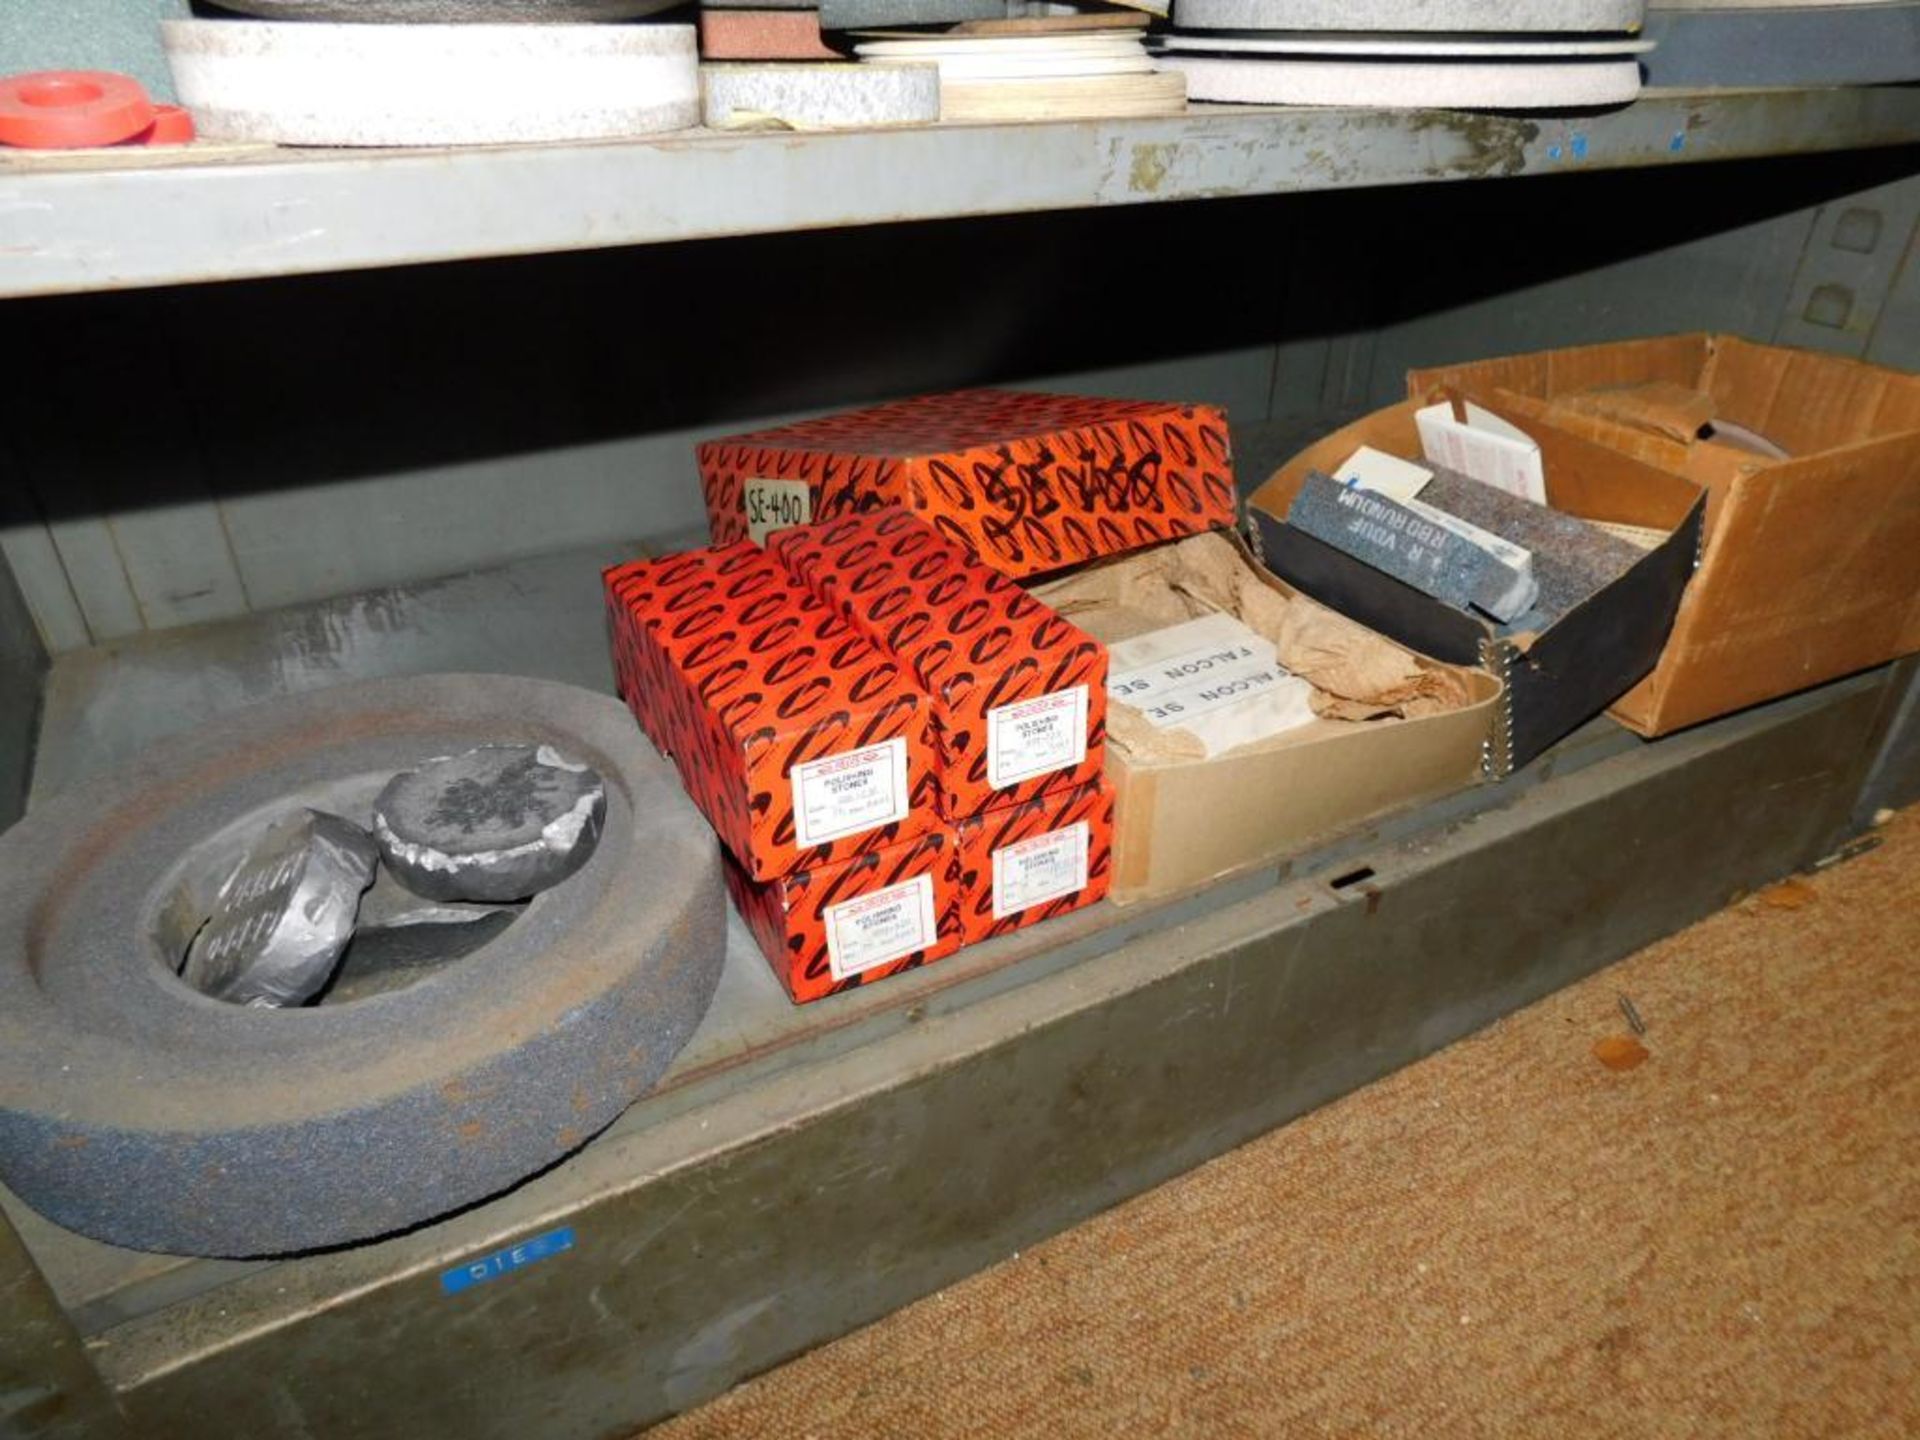 LOT: Contents of Rack: Large Quantity of Assorted Grinding Wheels, Cut Off Wheels, Polishing Stones, - Image 5 of 15